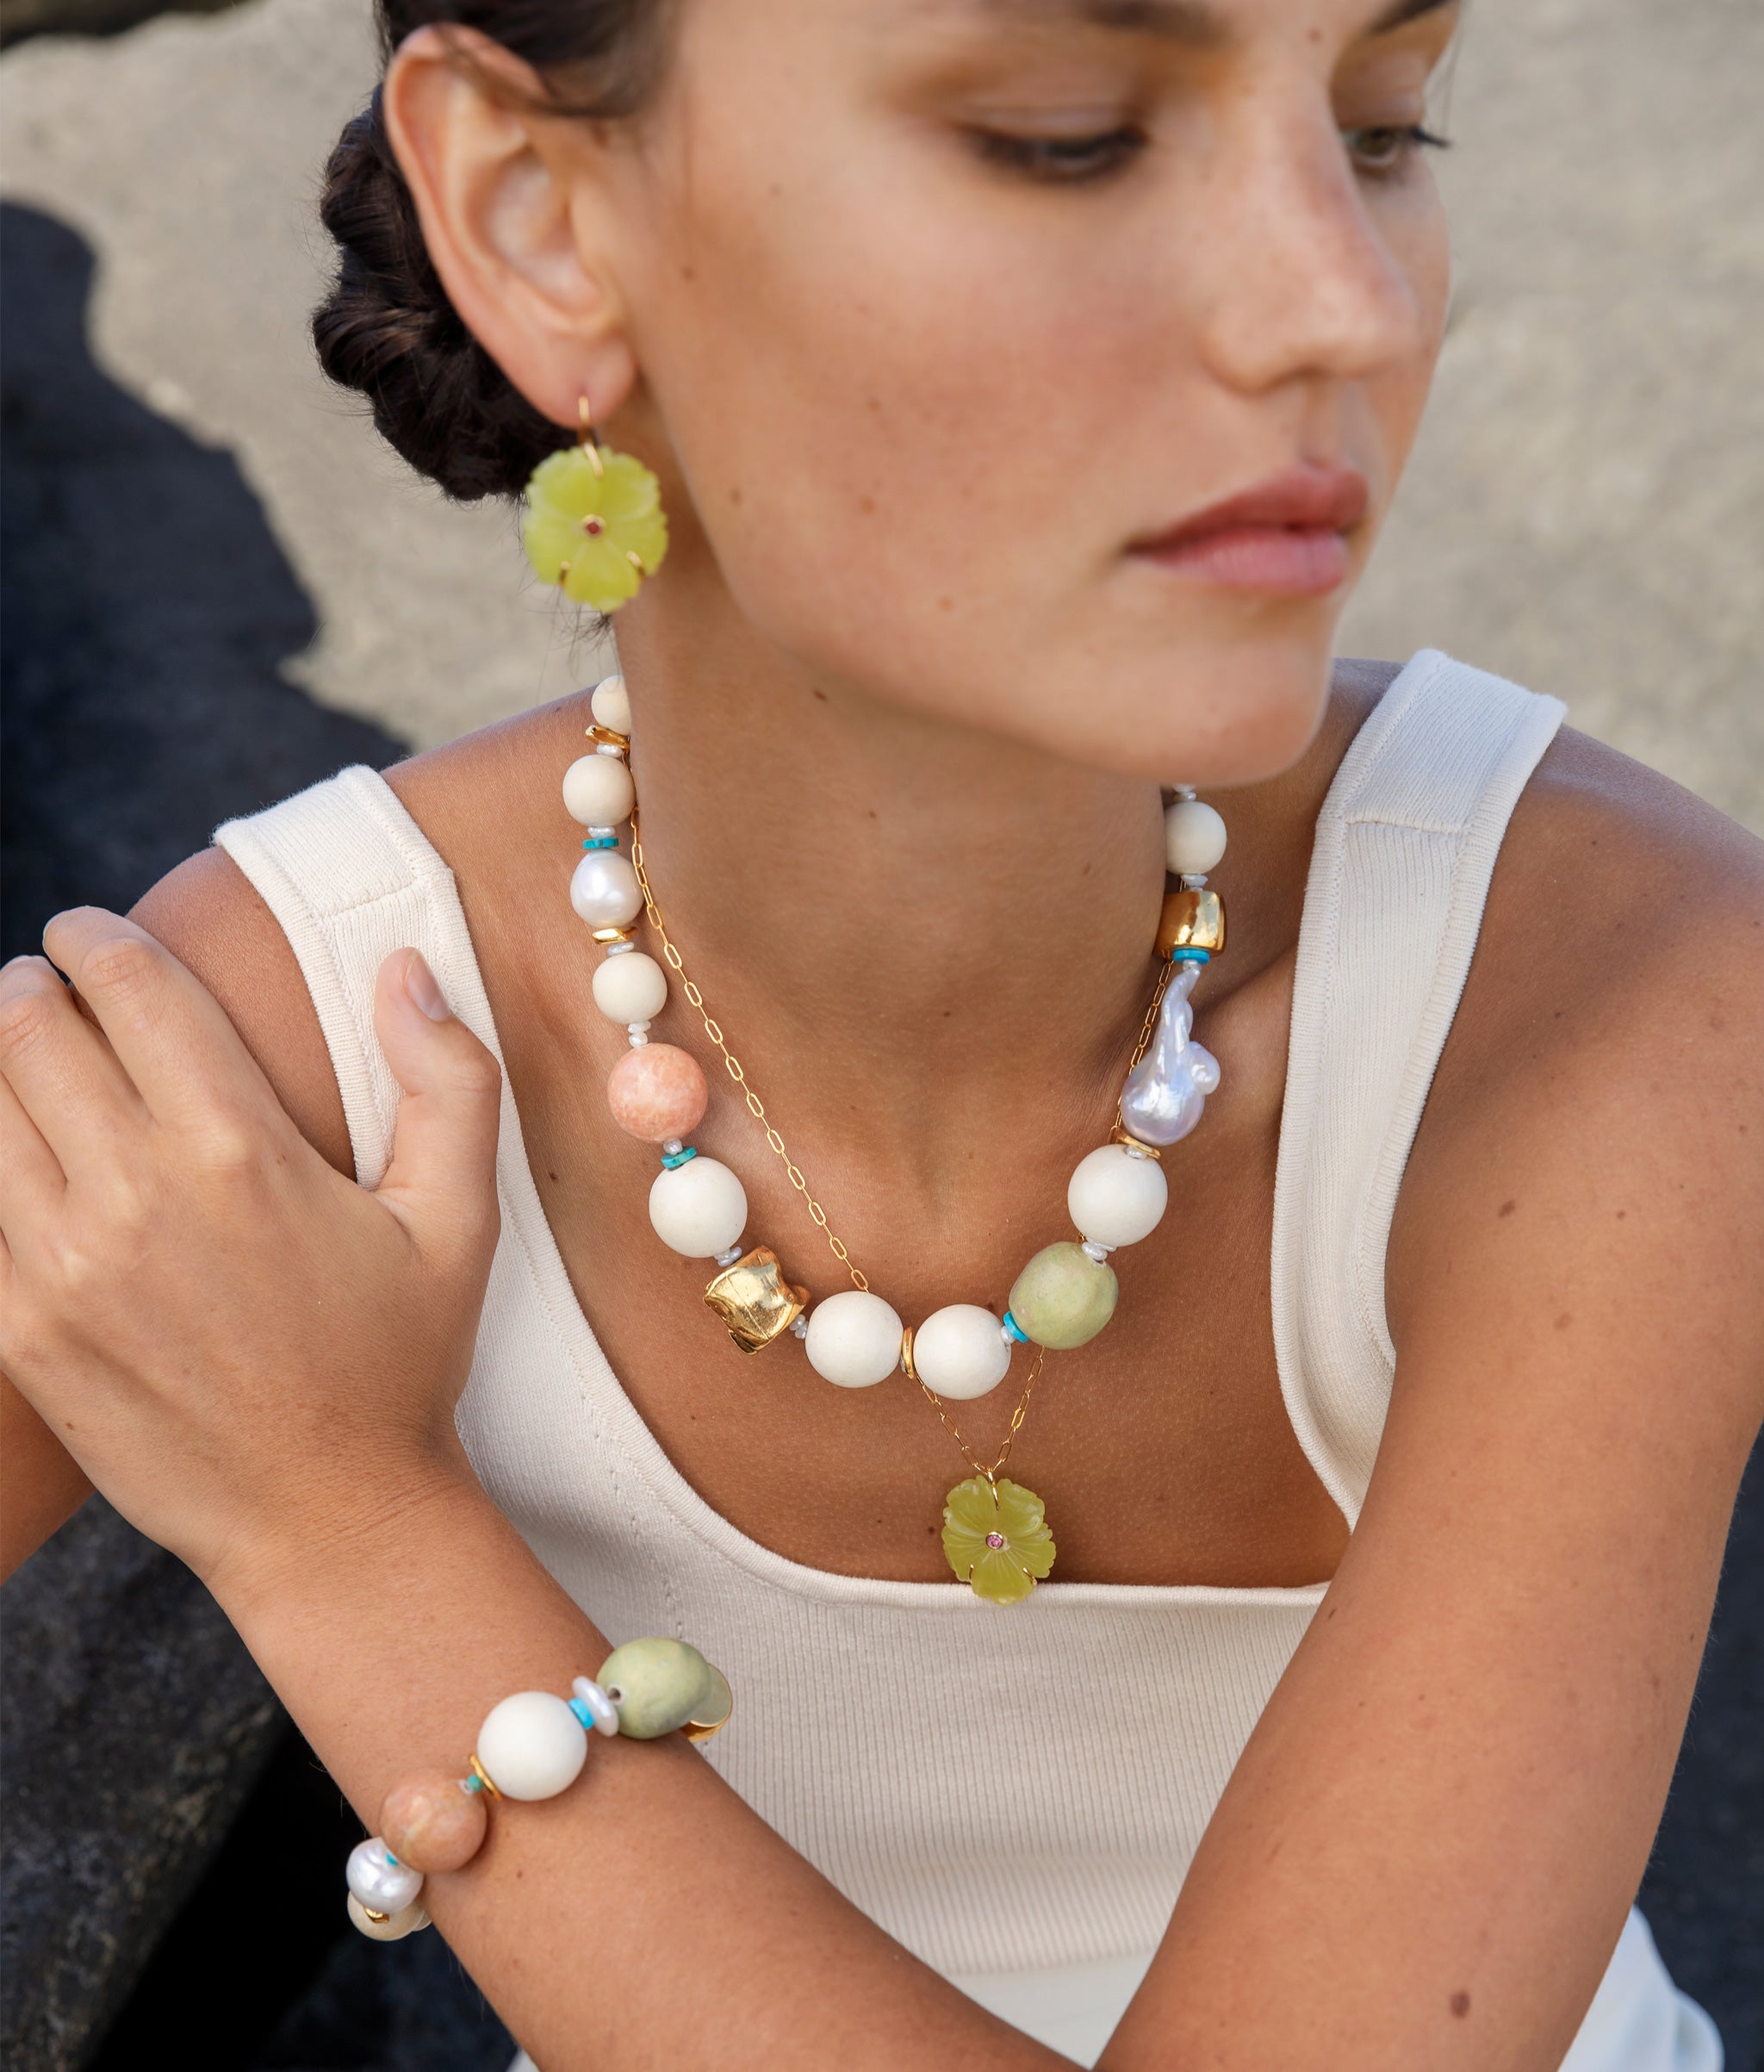 Closeup of model wearing Andros Bracelet and Necklace, paired with yellow-green floral necklace and earrings.